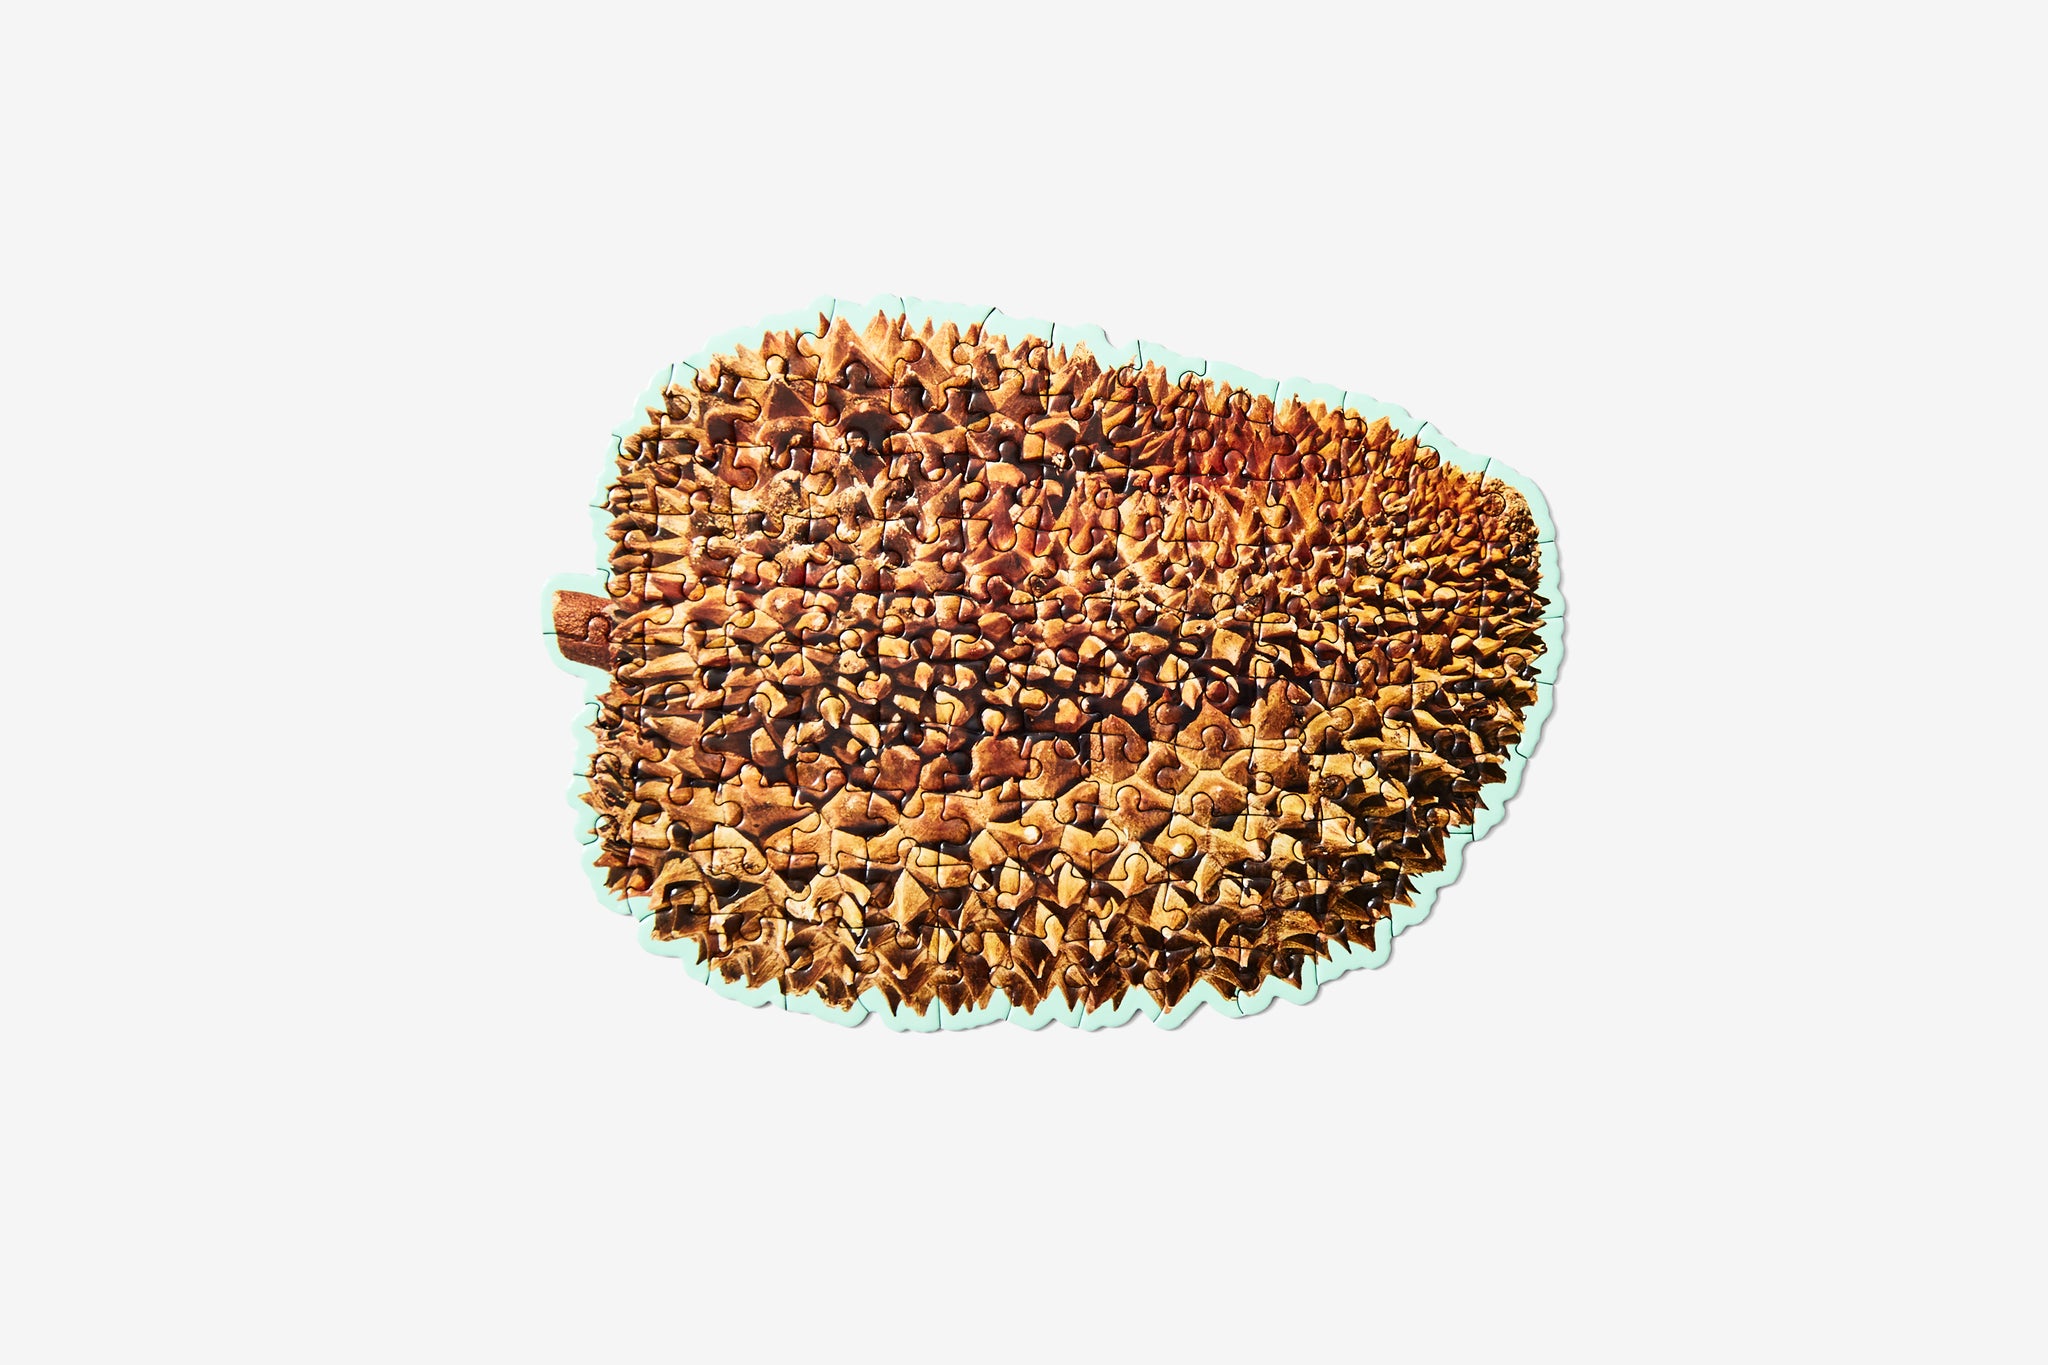 Little Puzzle Thing® - Durian (MOQ: 12)